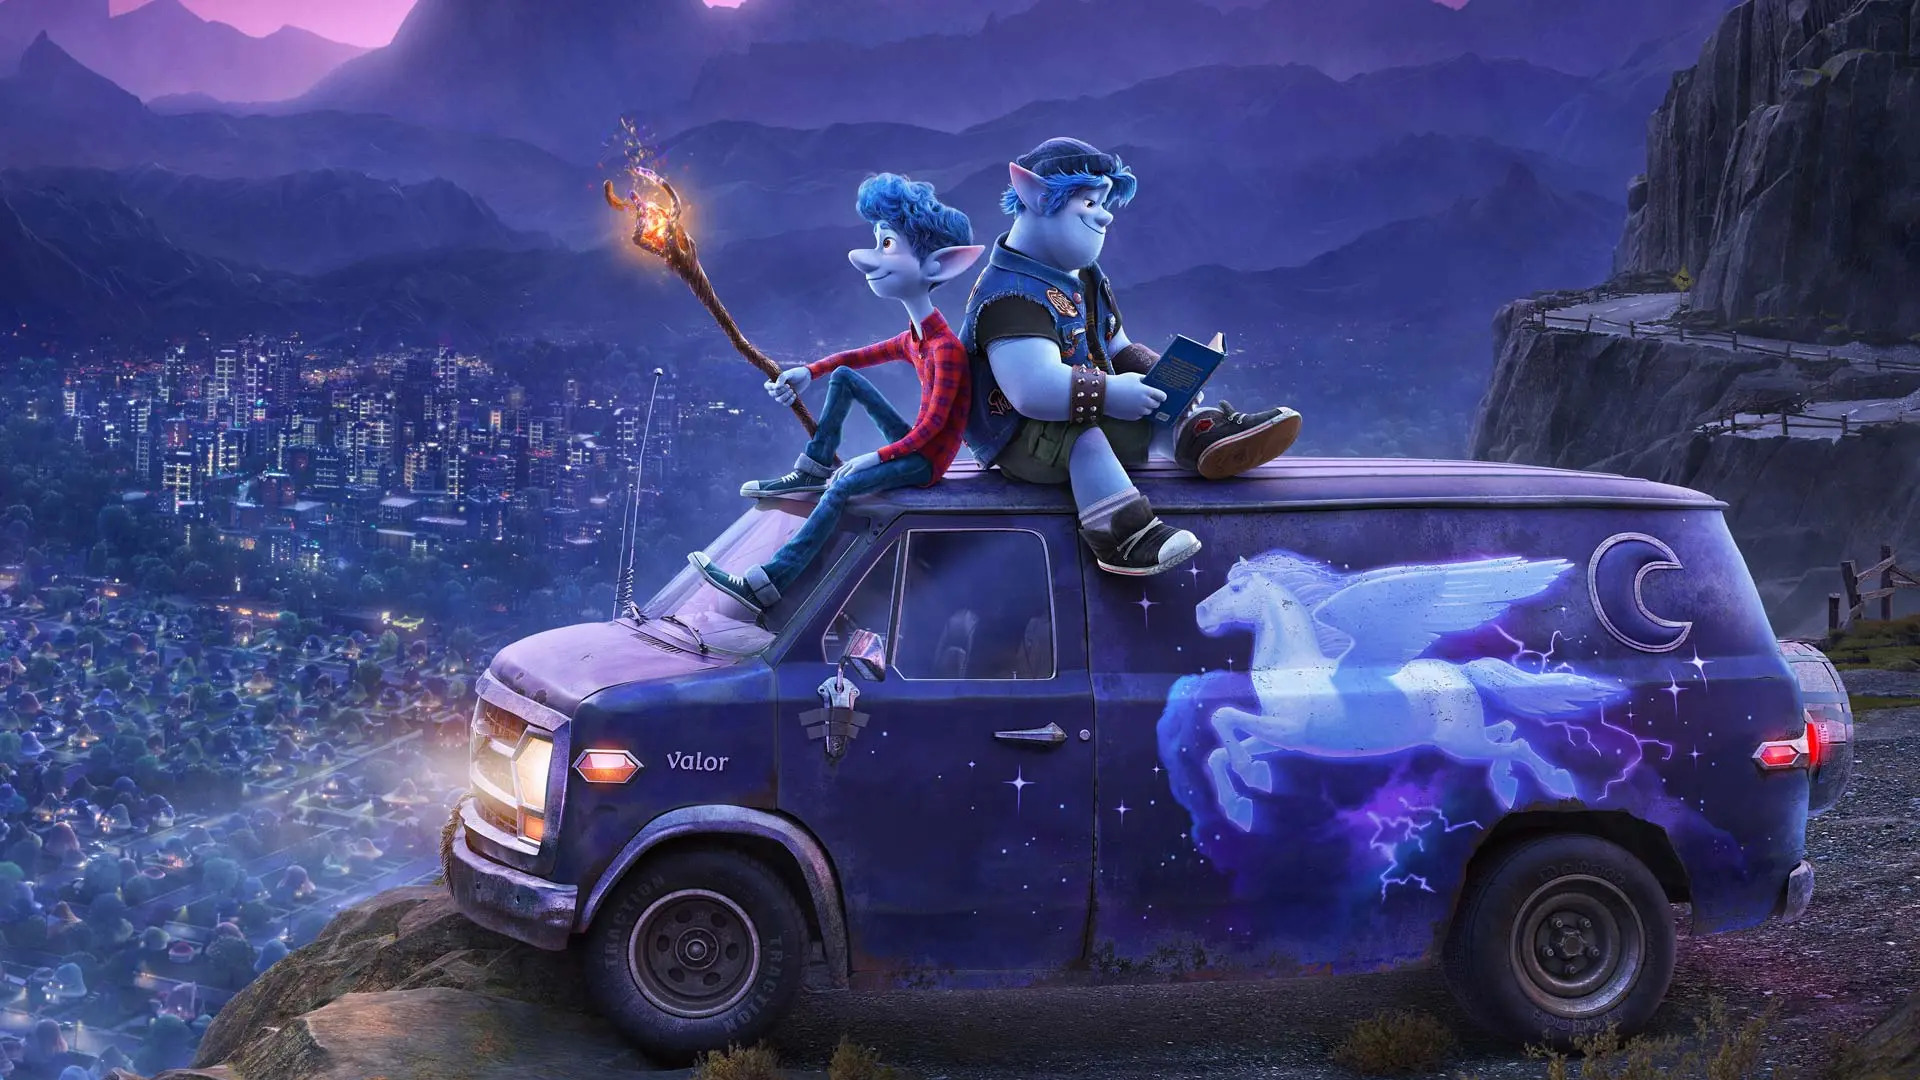 unward-two-brothers-blue-skin-sitting-on-car-under-moonlight_6_11zon